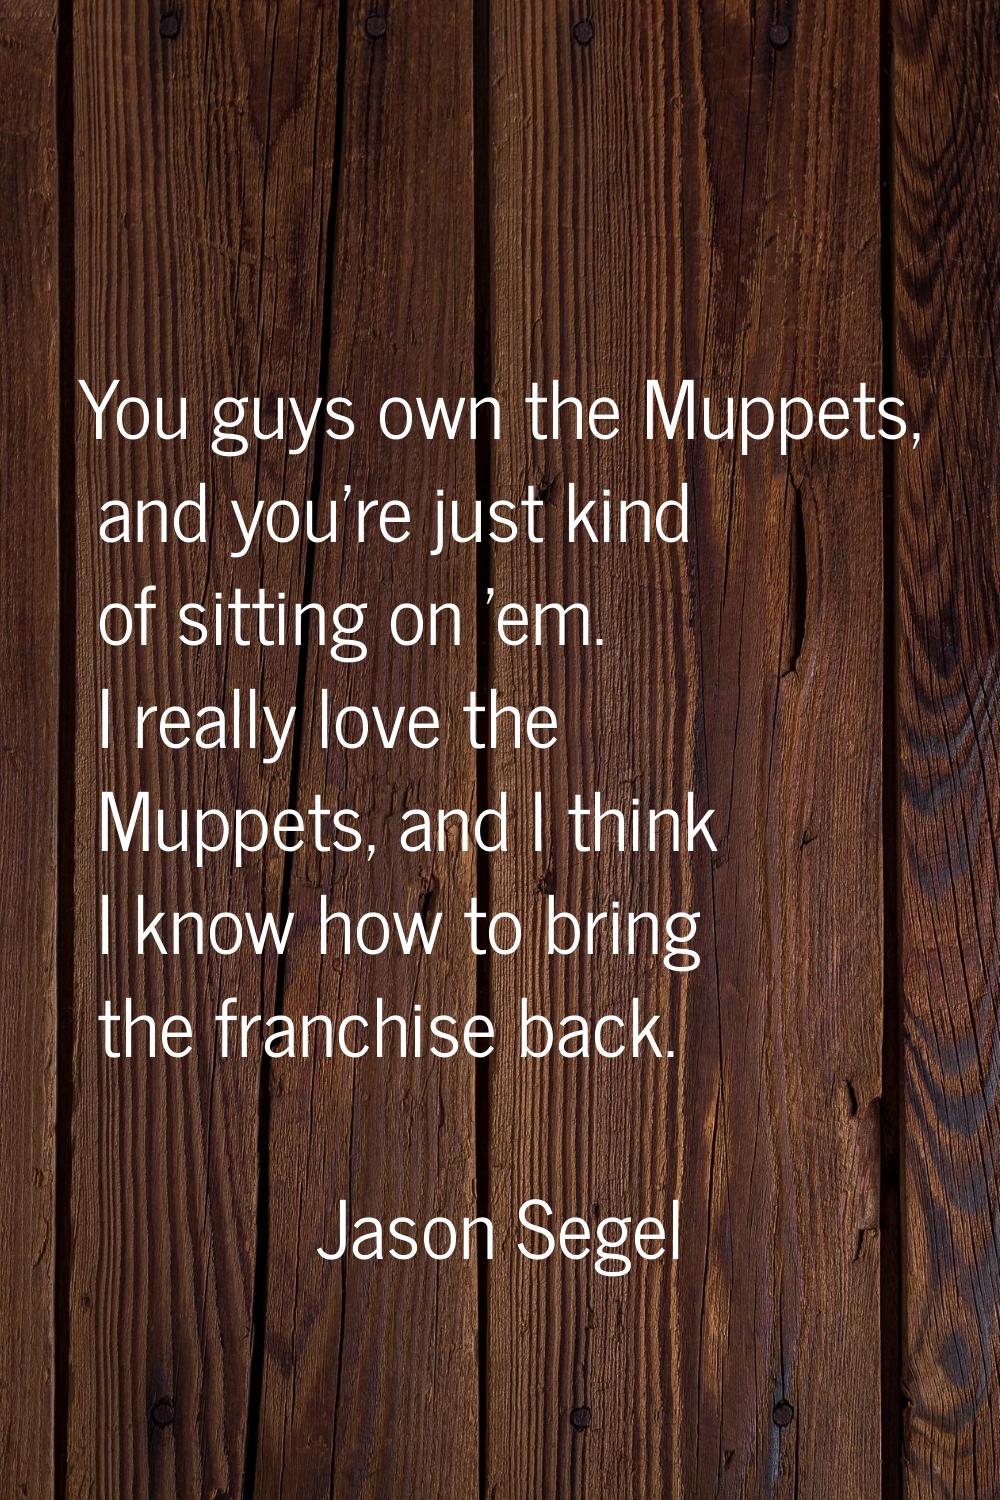 You guys own the Muppets, and you're just kind of sitting on 'em. I really love the Muppets, and I 